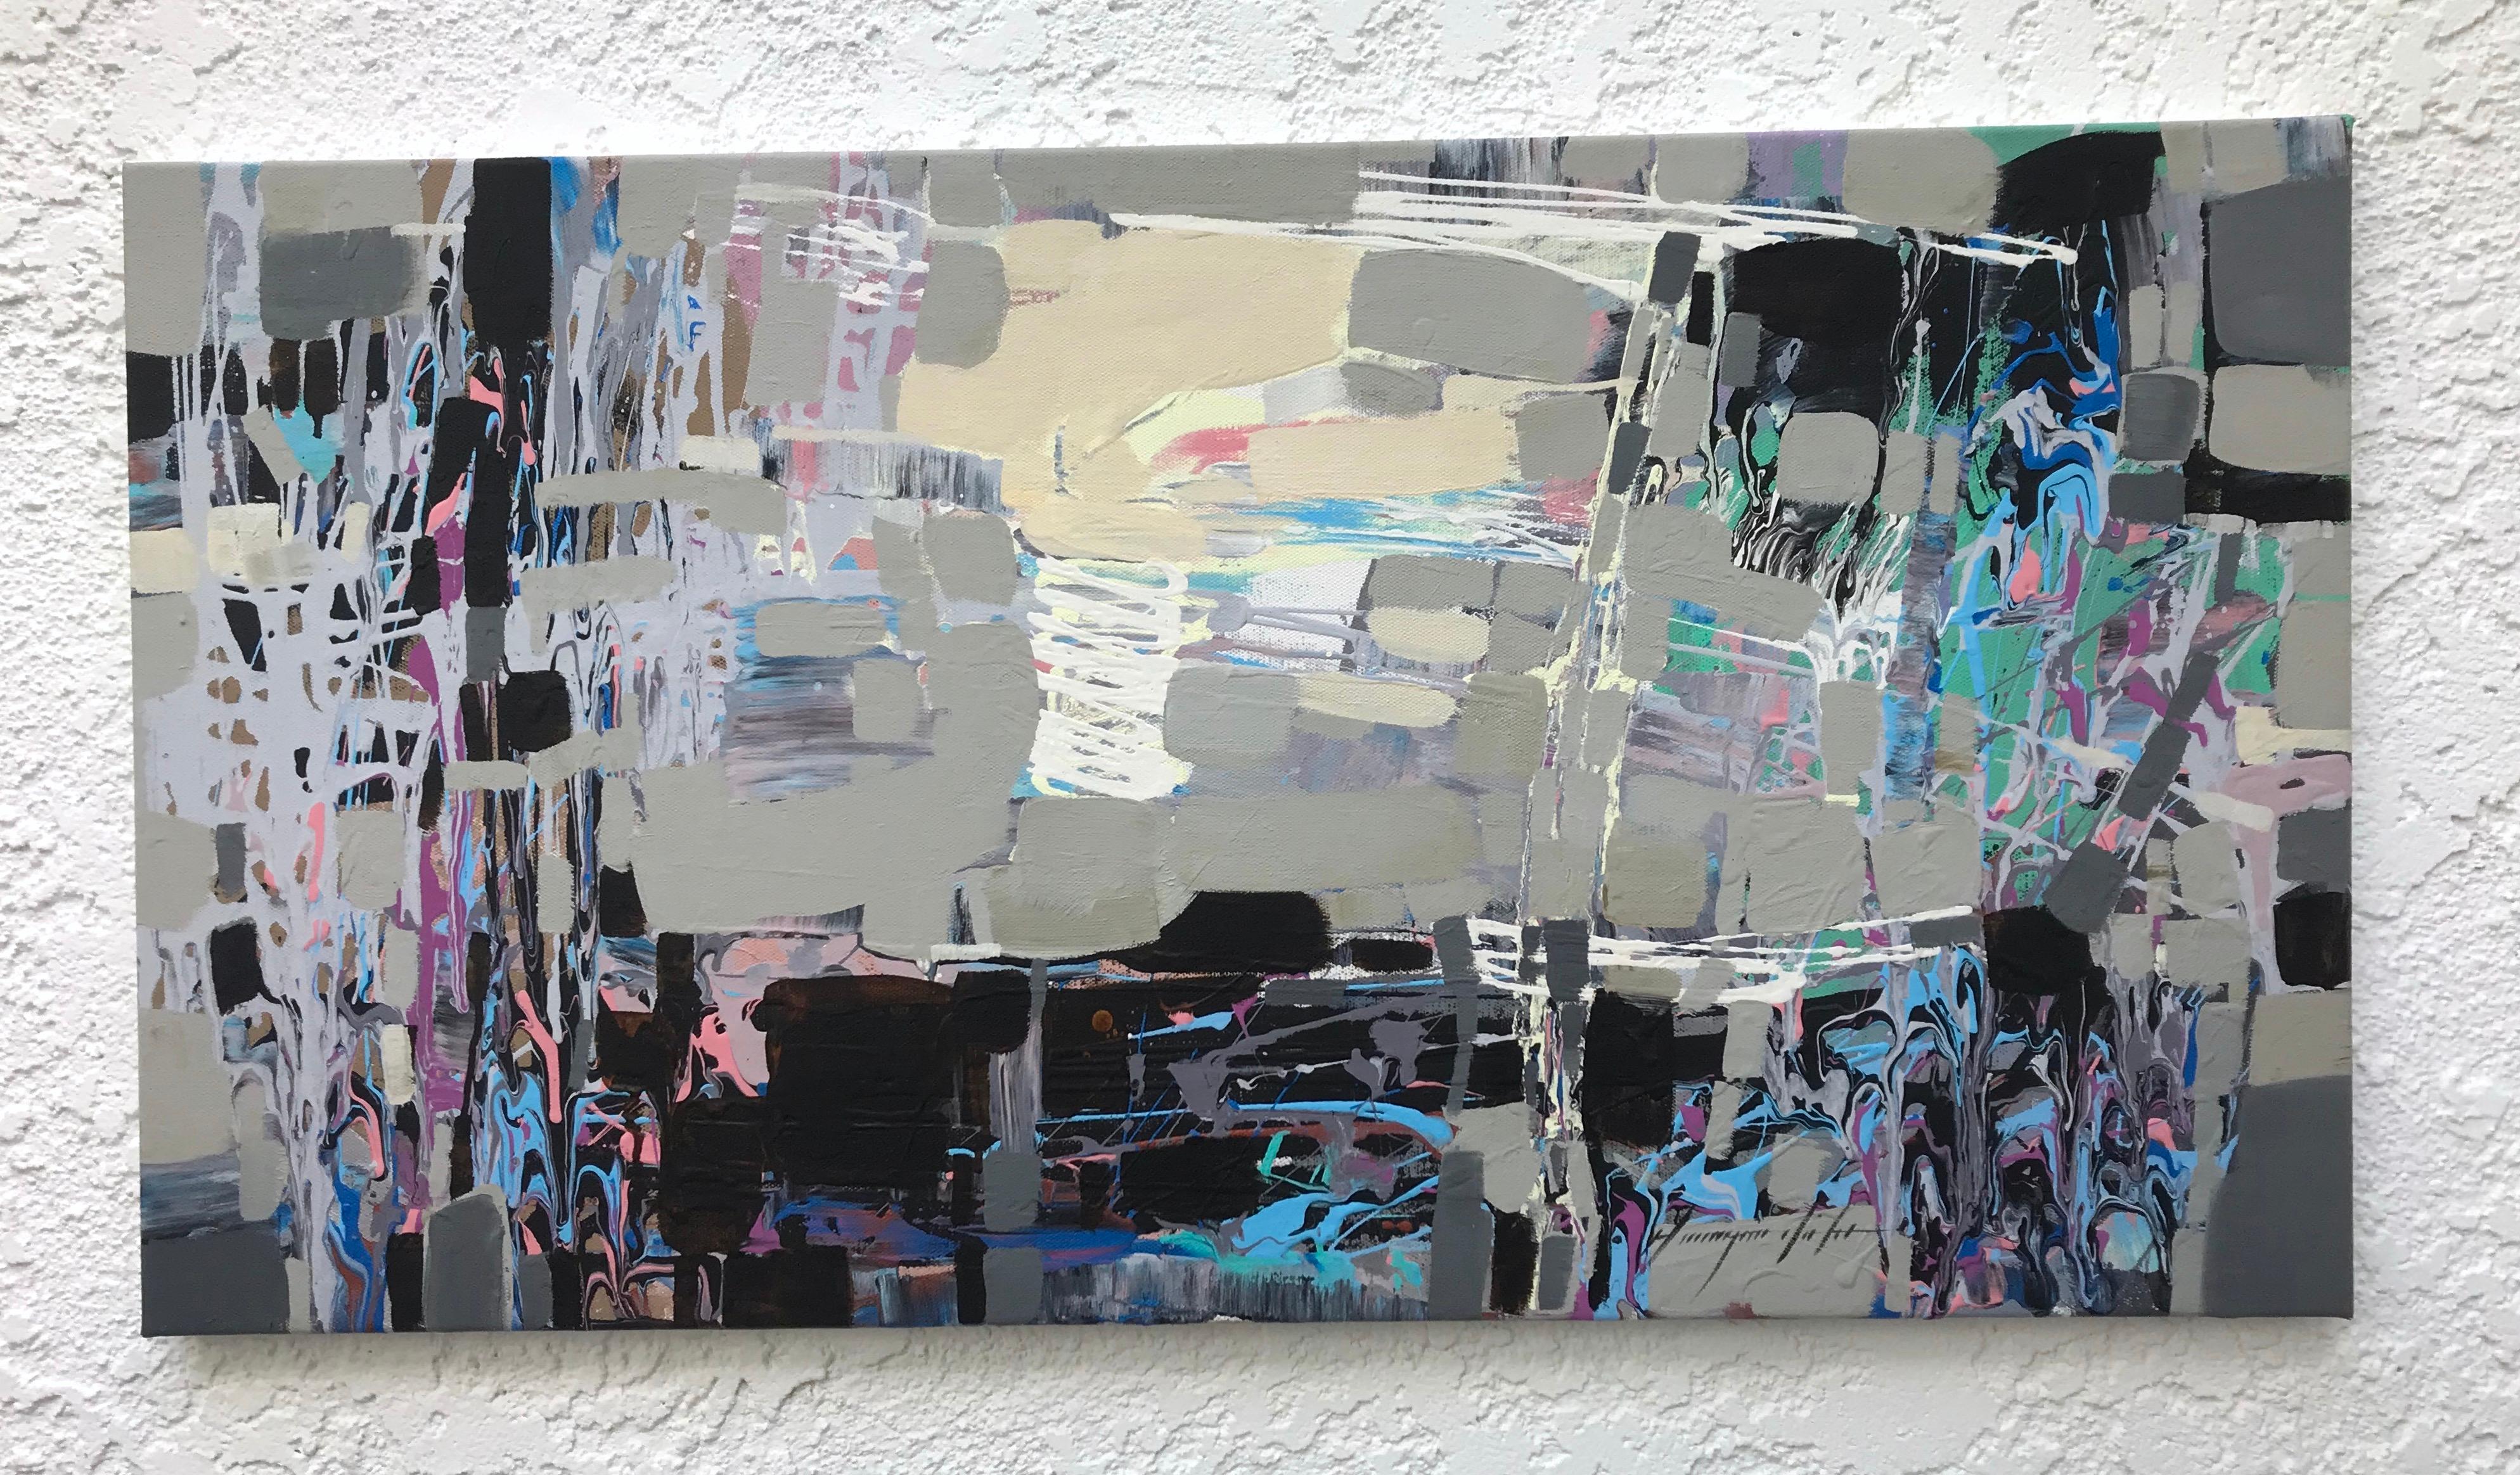 Artist: Vahe Yeremyan 
Work: Original Oil Painting, Handmade Artwork, One of a Kind 
Medium: Oil on Canvas 
Year: 2020
Style: Abstract Art, 
Subject: Gray in Portland,
Size: 16